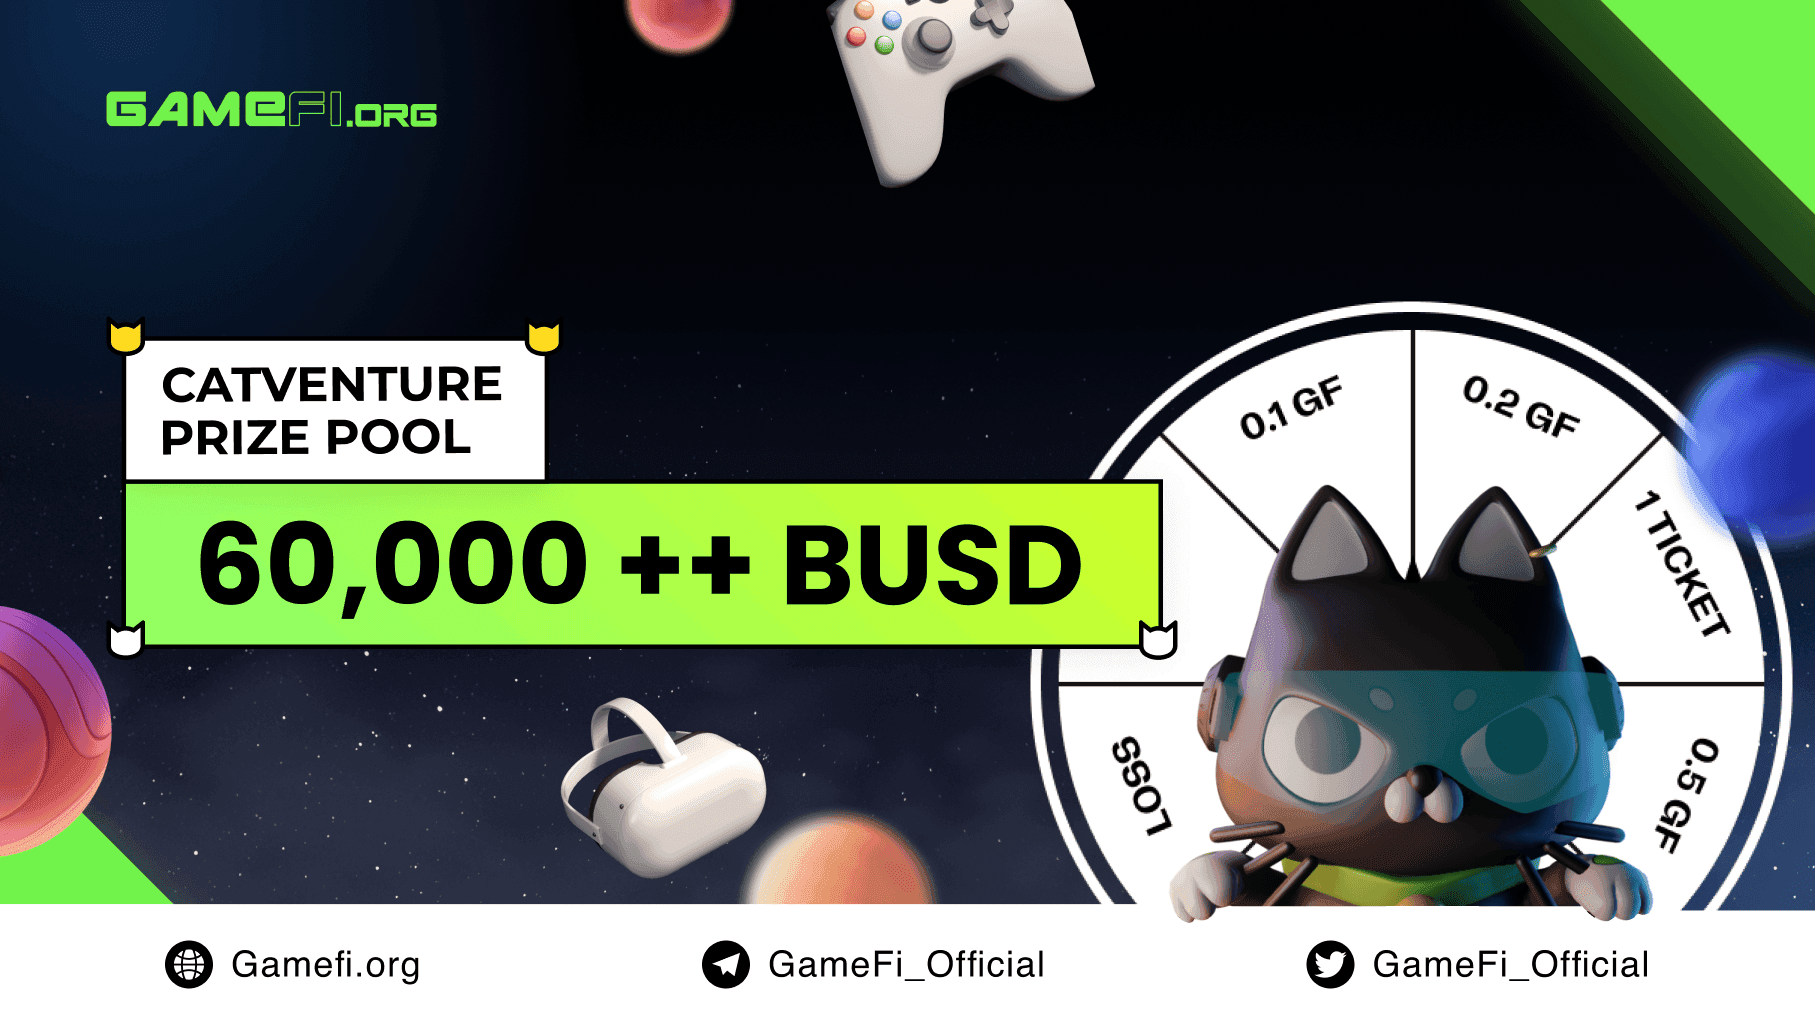 GAMEFIVERSARY PRIZE POOL WORTH MORE THAN 60,000 BUSD - ARE YOU READY TO REACH THE TOP?